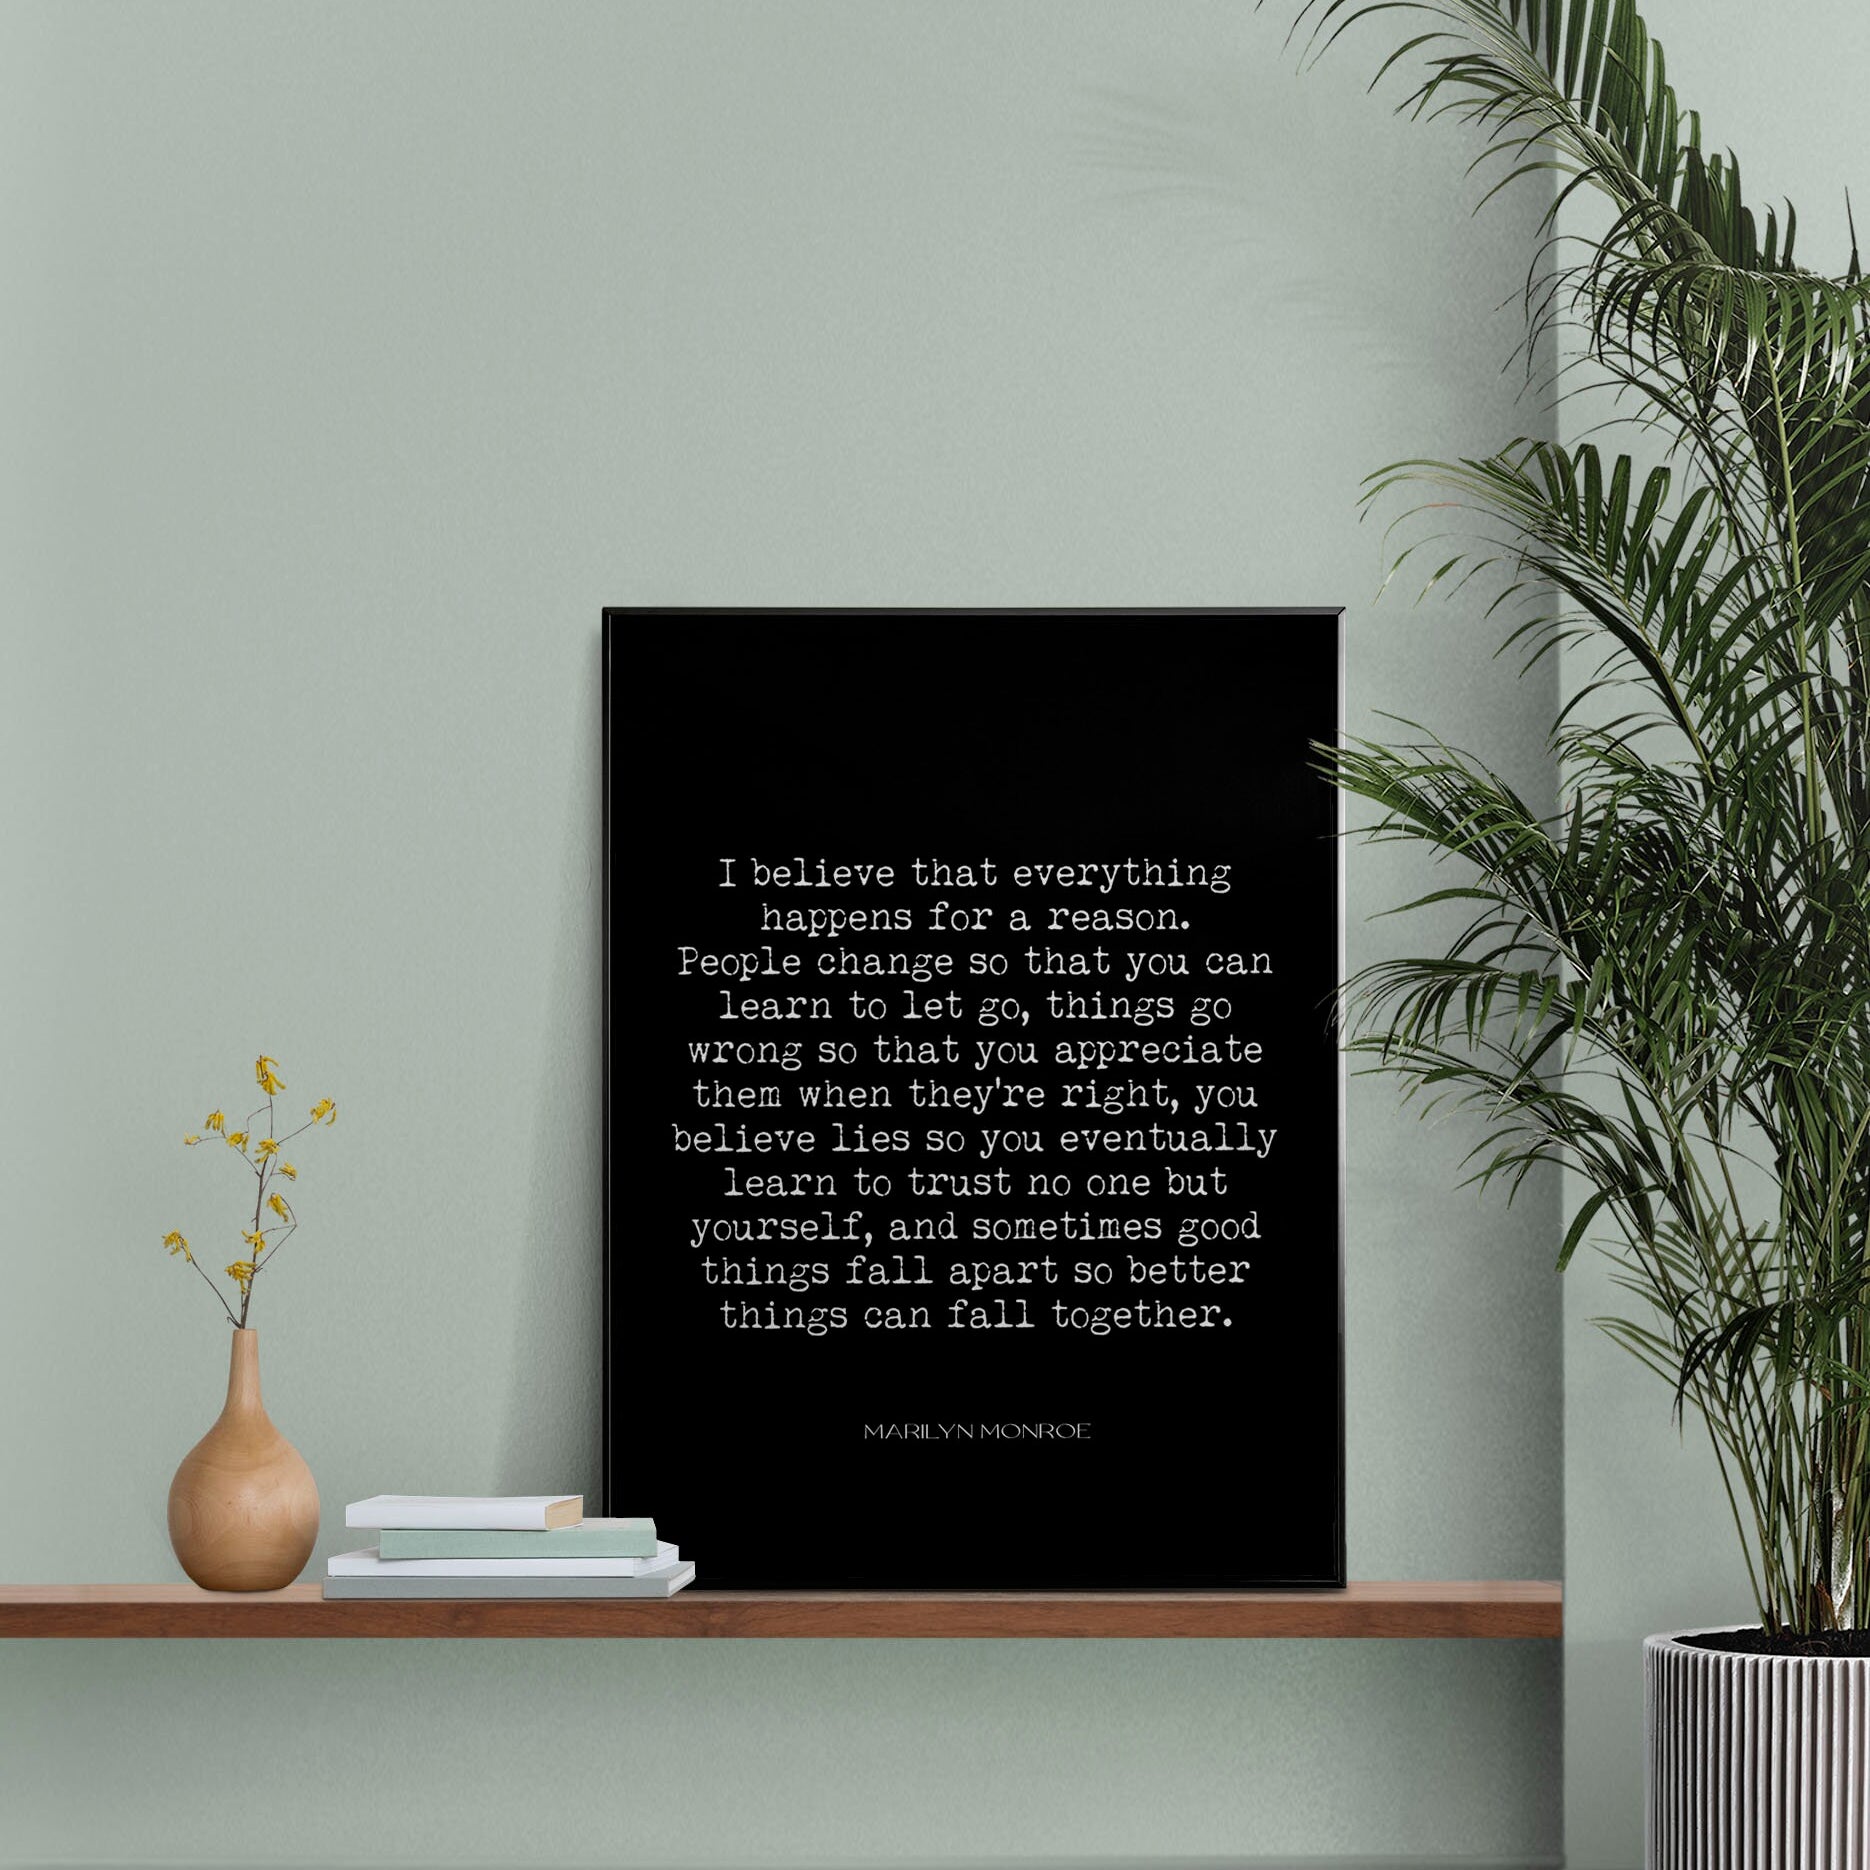 Marilyn Monroe Quote Print - I Believe That Everything Happens For A Reason, Black & White Wall Art Quote Print Unframed / Framed Wall Decor